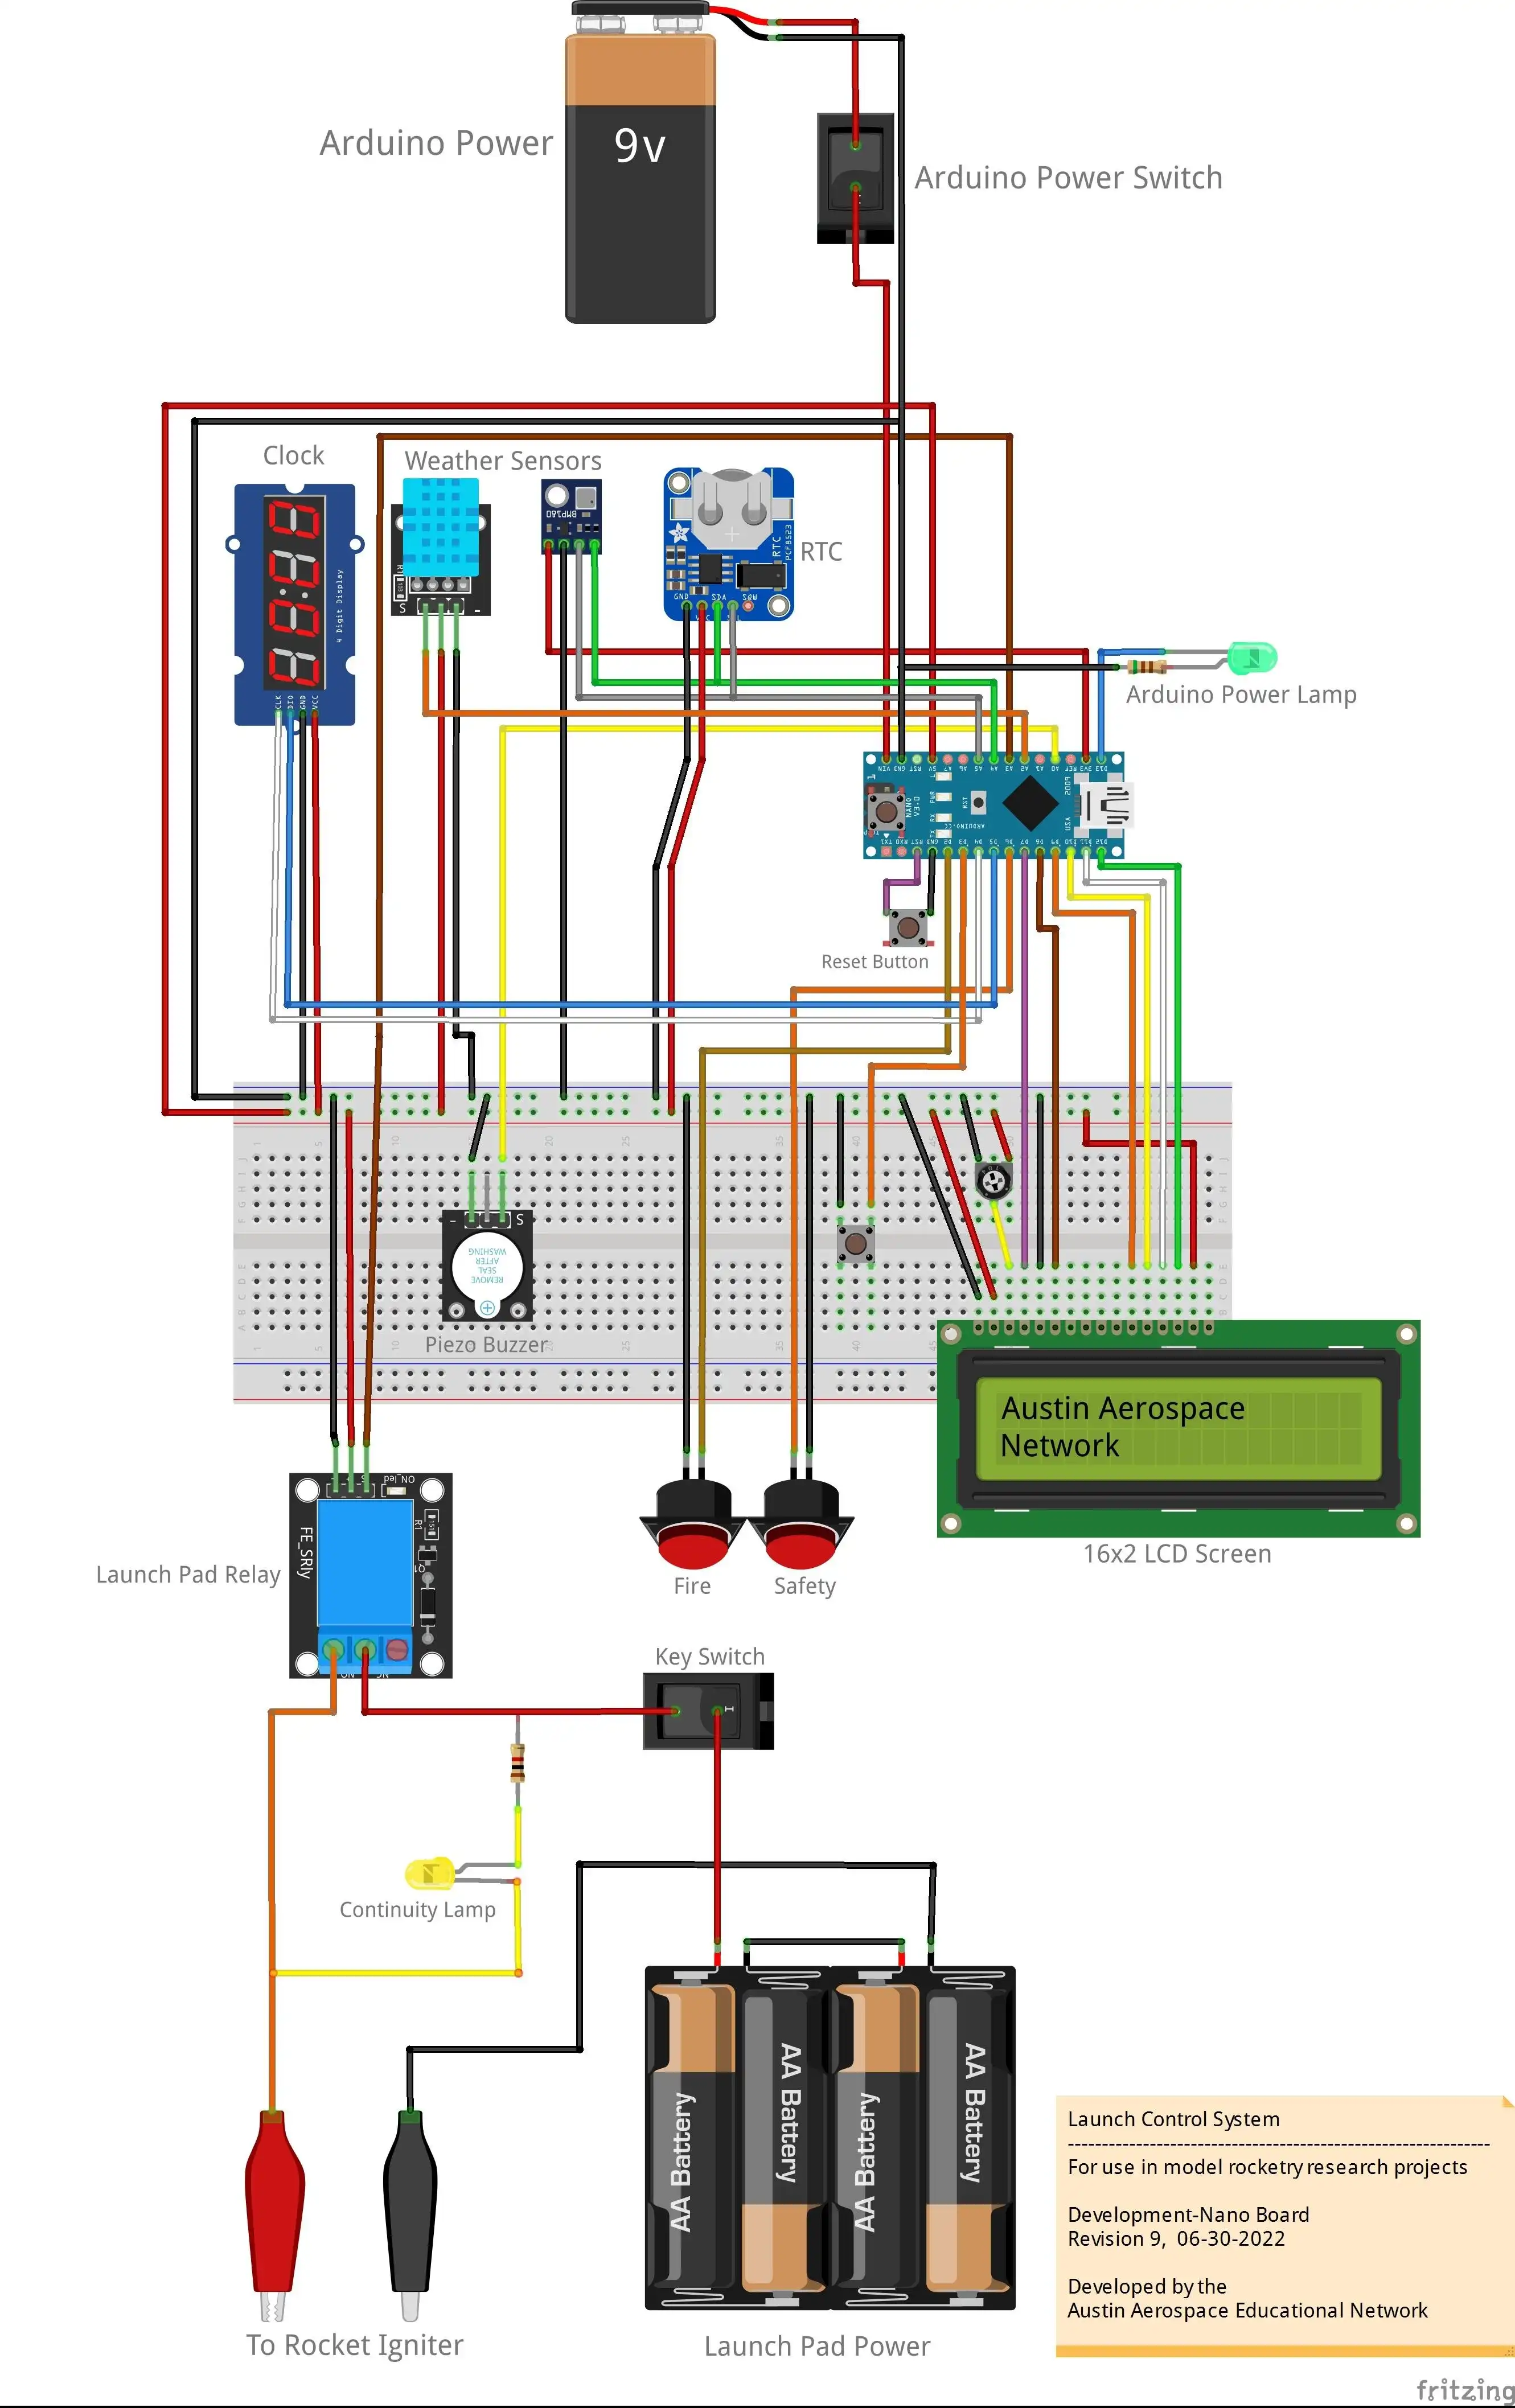 Download web tool or web app Arduino Launch Control System (LCS)